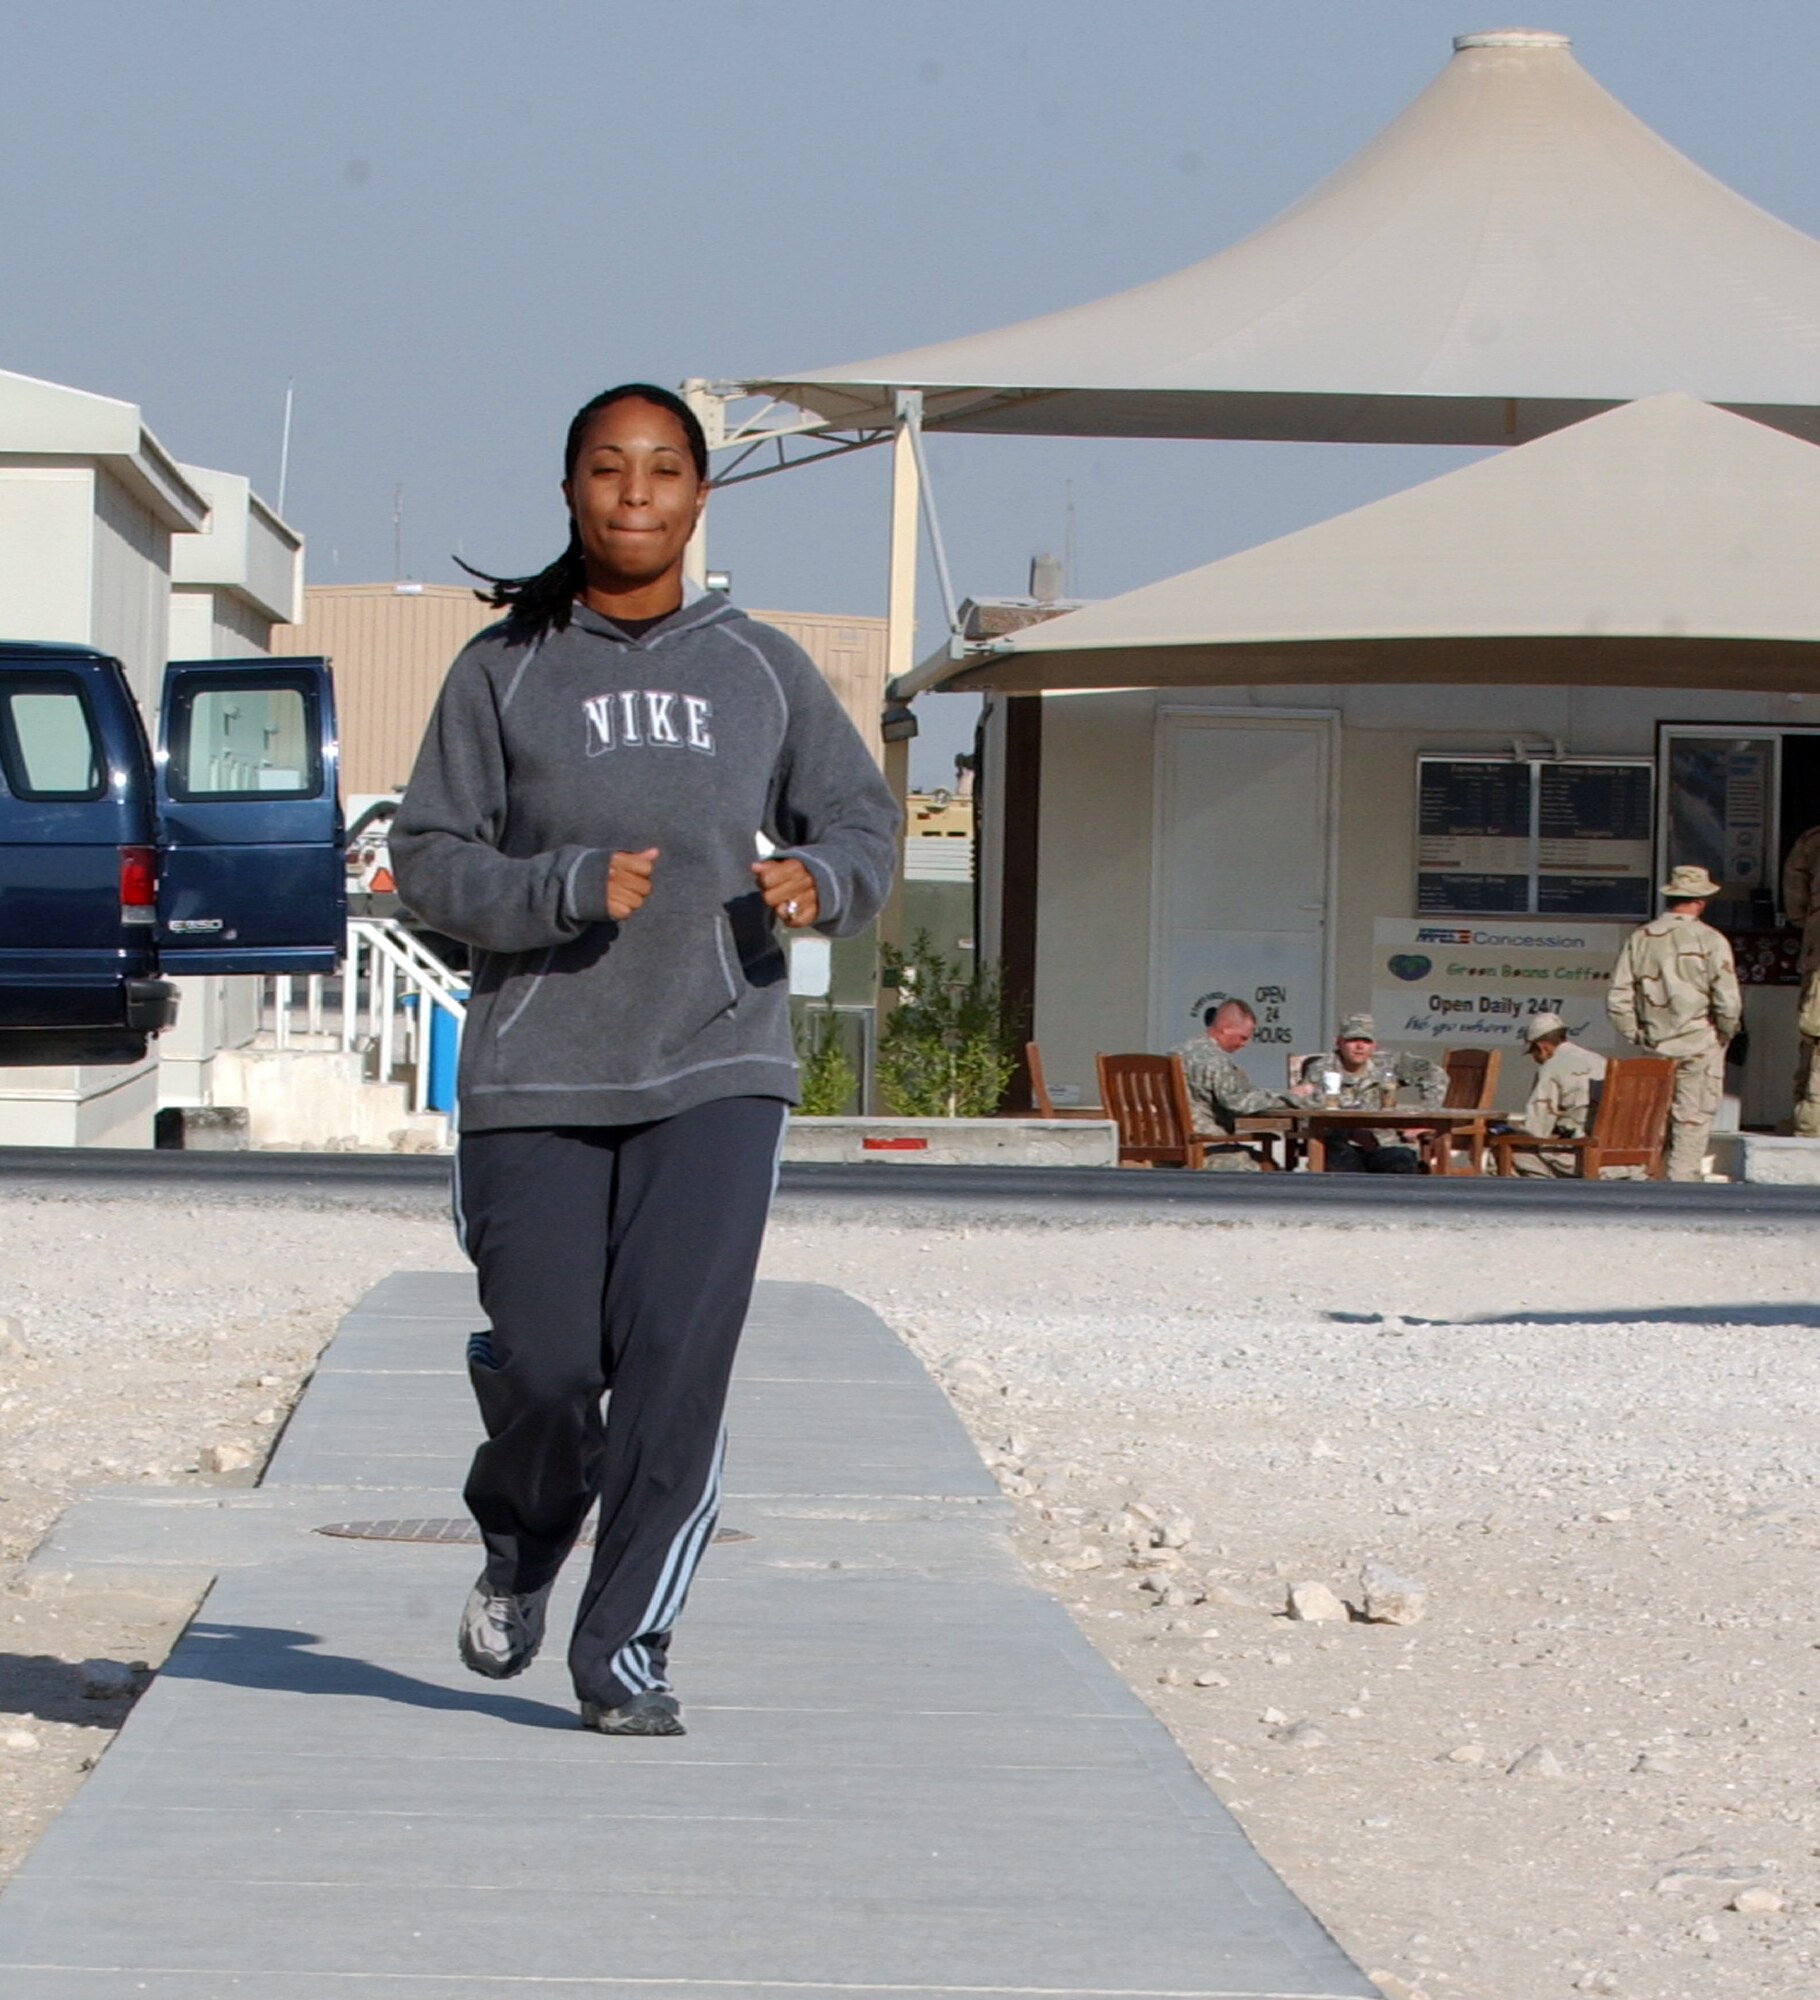 SOUTHWEST ASIA (AFPN) -- Tech. Sgt. Andrea Allen runs 3 miles during her deployment. She is with the 379th Air Expeditionary Wing's safety office at a forward-deployed location. The 3-mile run is a goal she made when she first arrived here. (U.S. Air Force photo by Staff Sgt. Joshua Strang)

 
